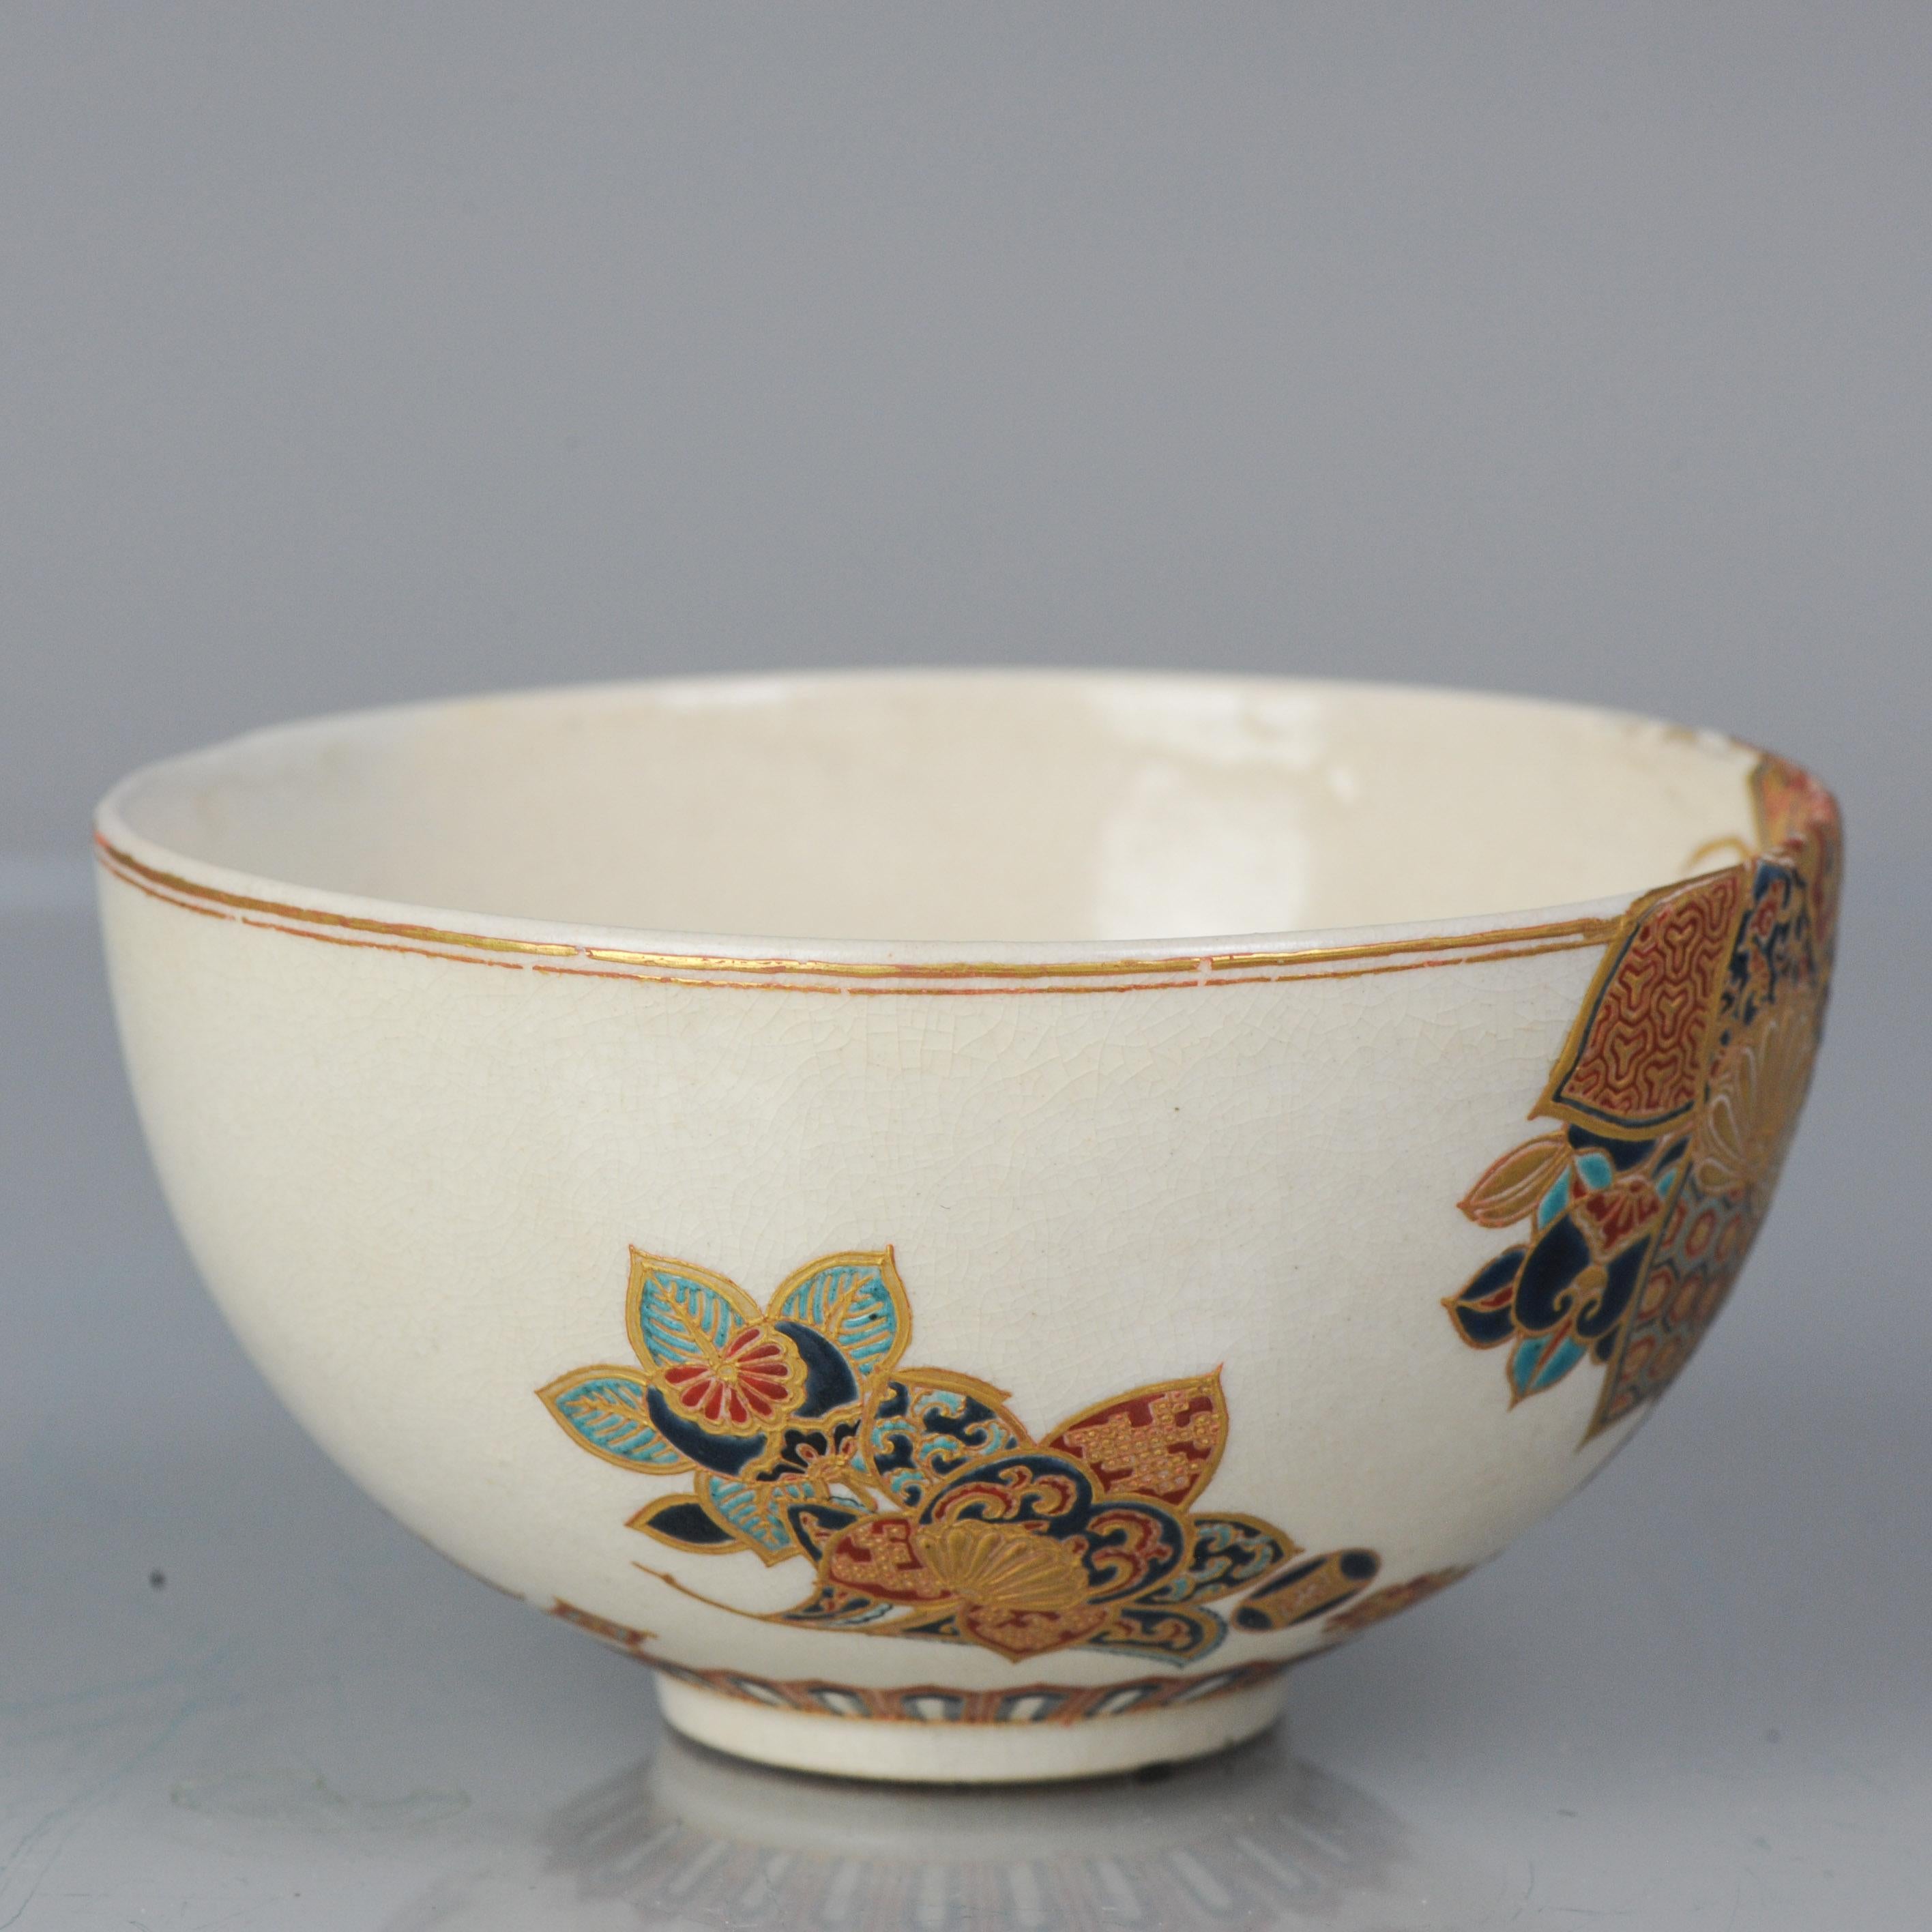 Description
A Gosu Blue Japanese Satsuma tea bowl, Meiji Period. Incredible and very detailed piece. Just superb

Unmarked


Condition
1 bumspot to rim. Size 118 x 62 mm D X H

Period
Meiji Periode (1867-1912).